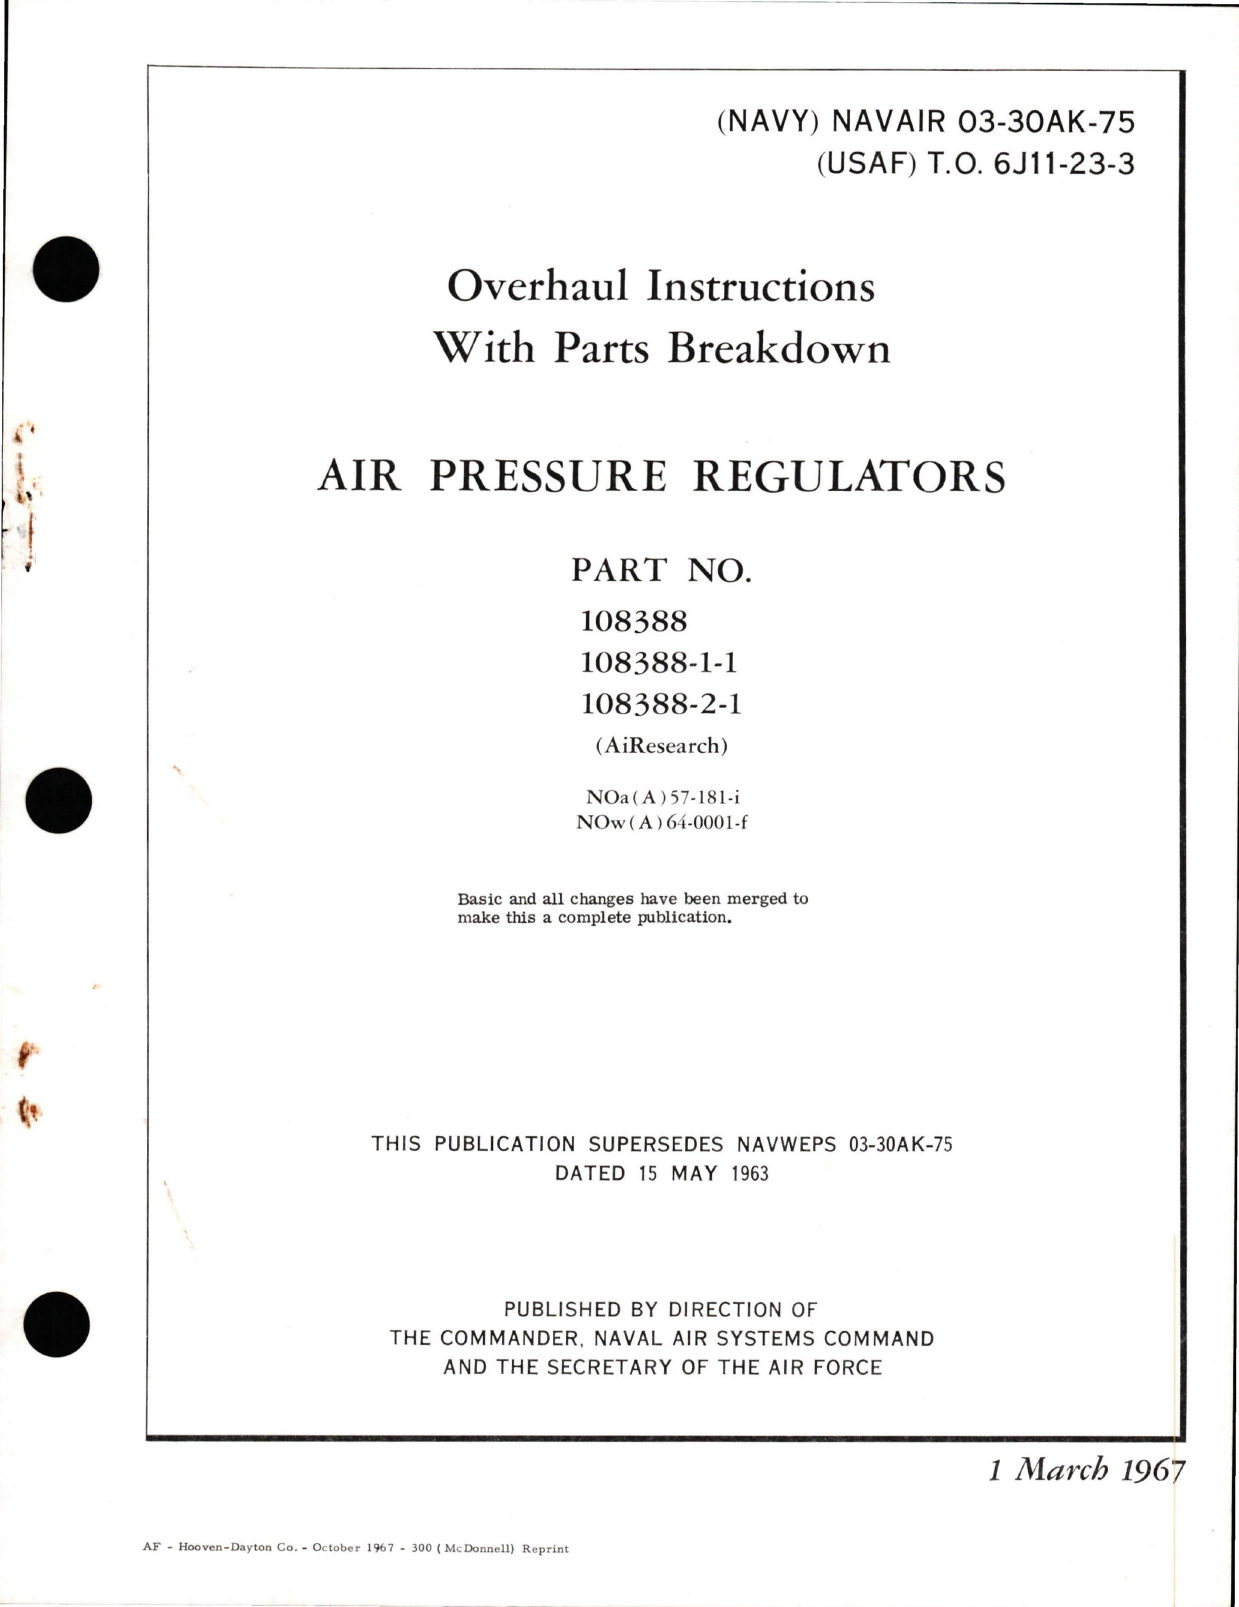 Sample page 1 from AirCorps Library document: Overhaul Instructions with Parts Breakdown for Air Pressure Regulators - Parts 108388, 108388-1-1, and 108388-2-1